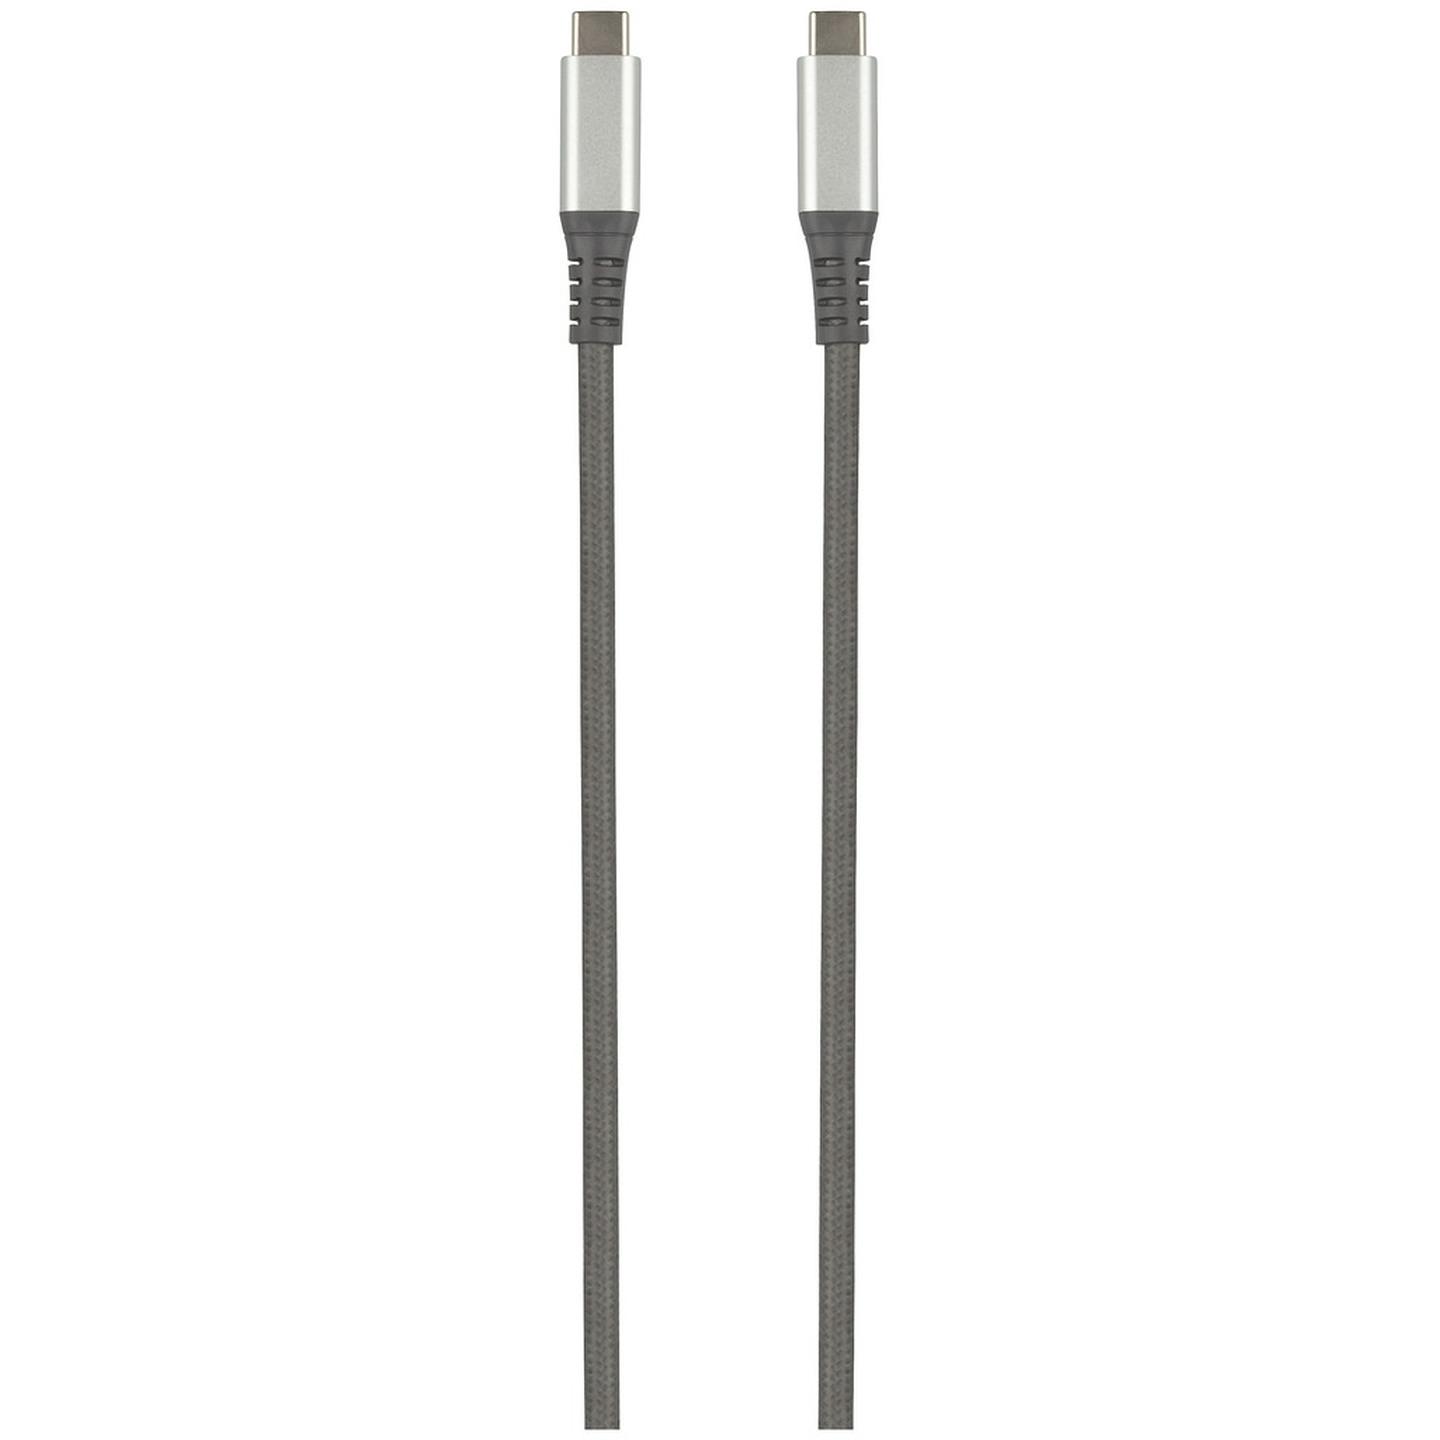 2m Concord USB 3.1 Type-C Plug to Plug Cable with Power Delivery Supported